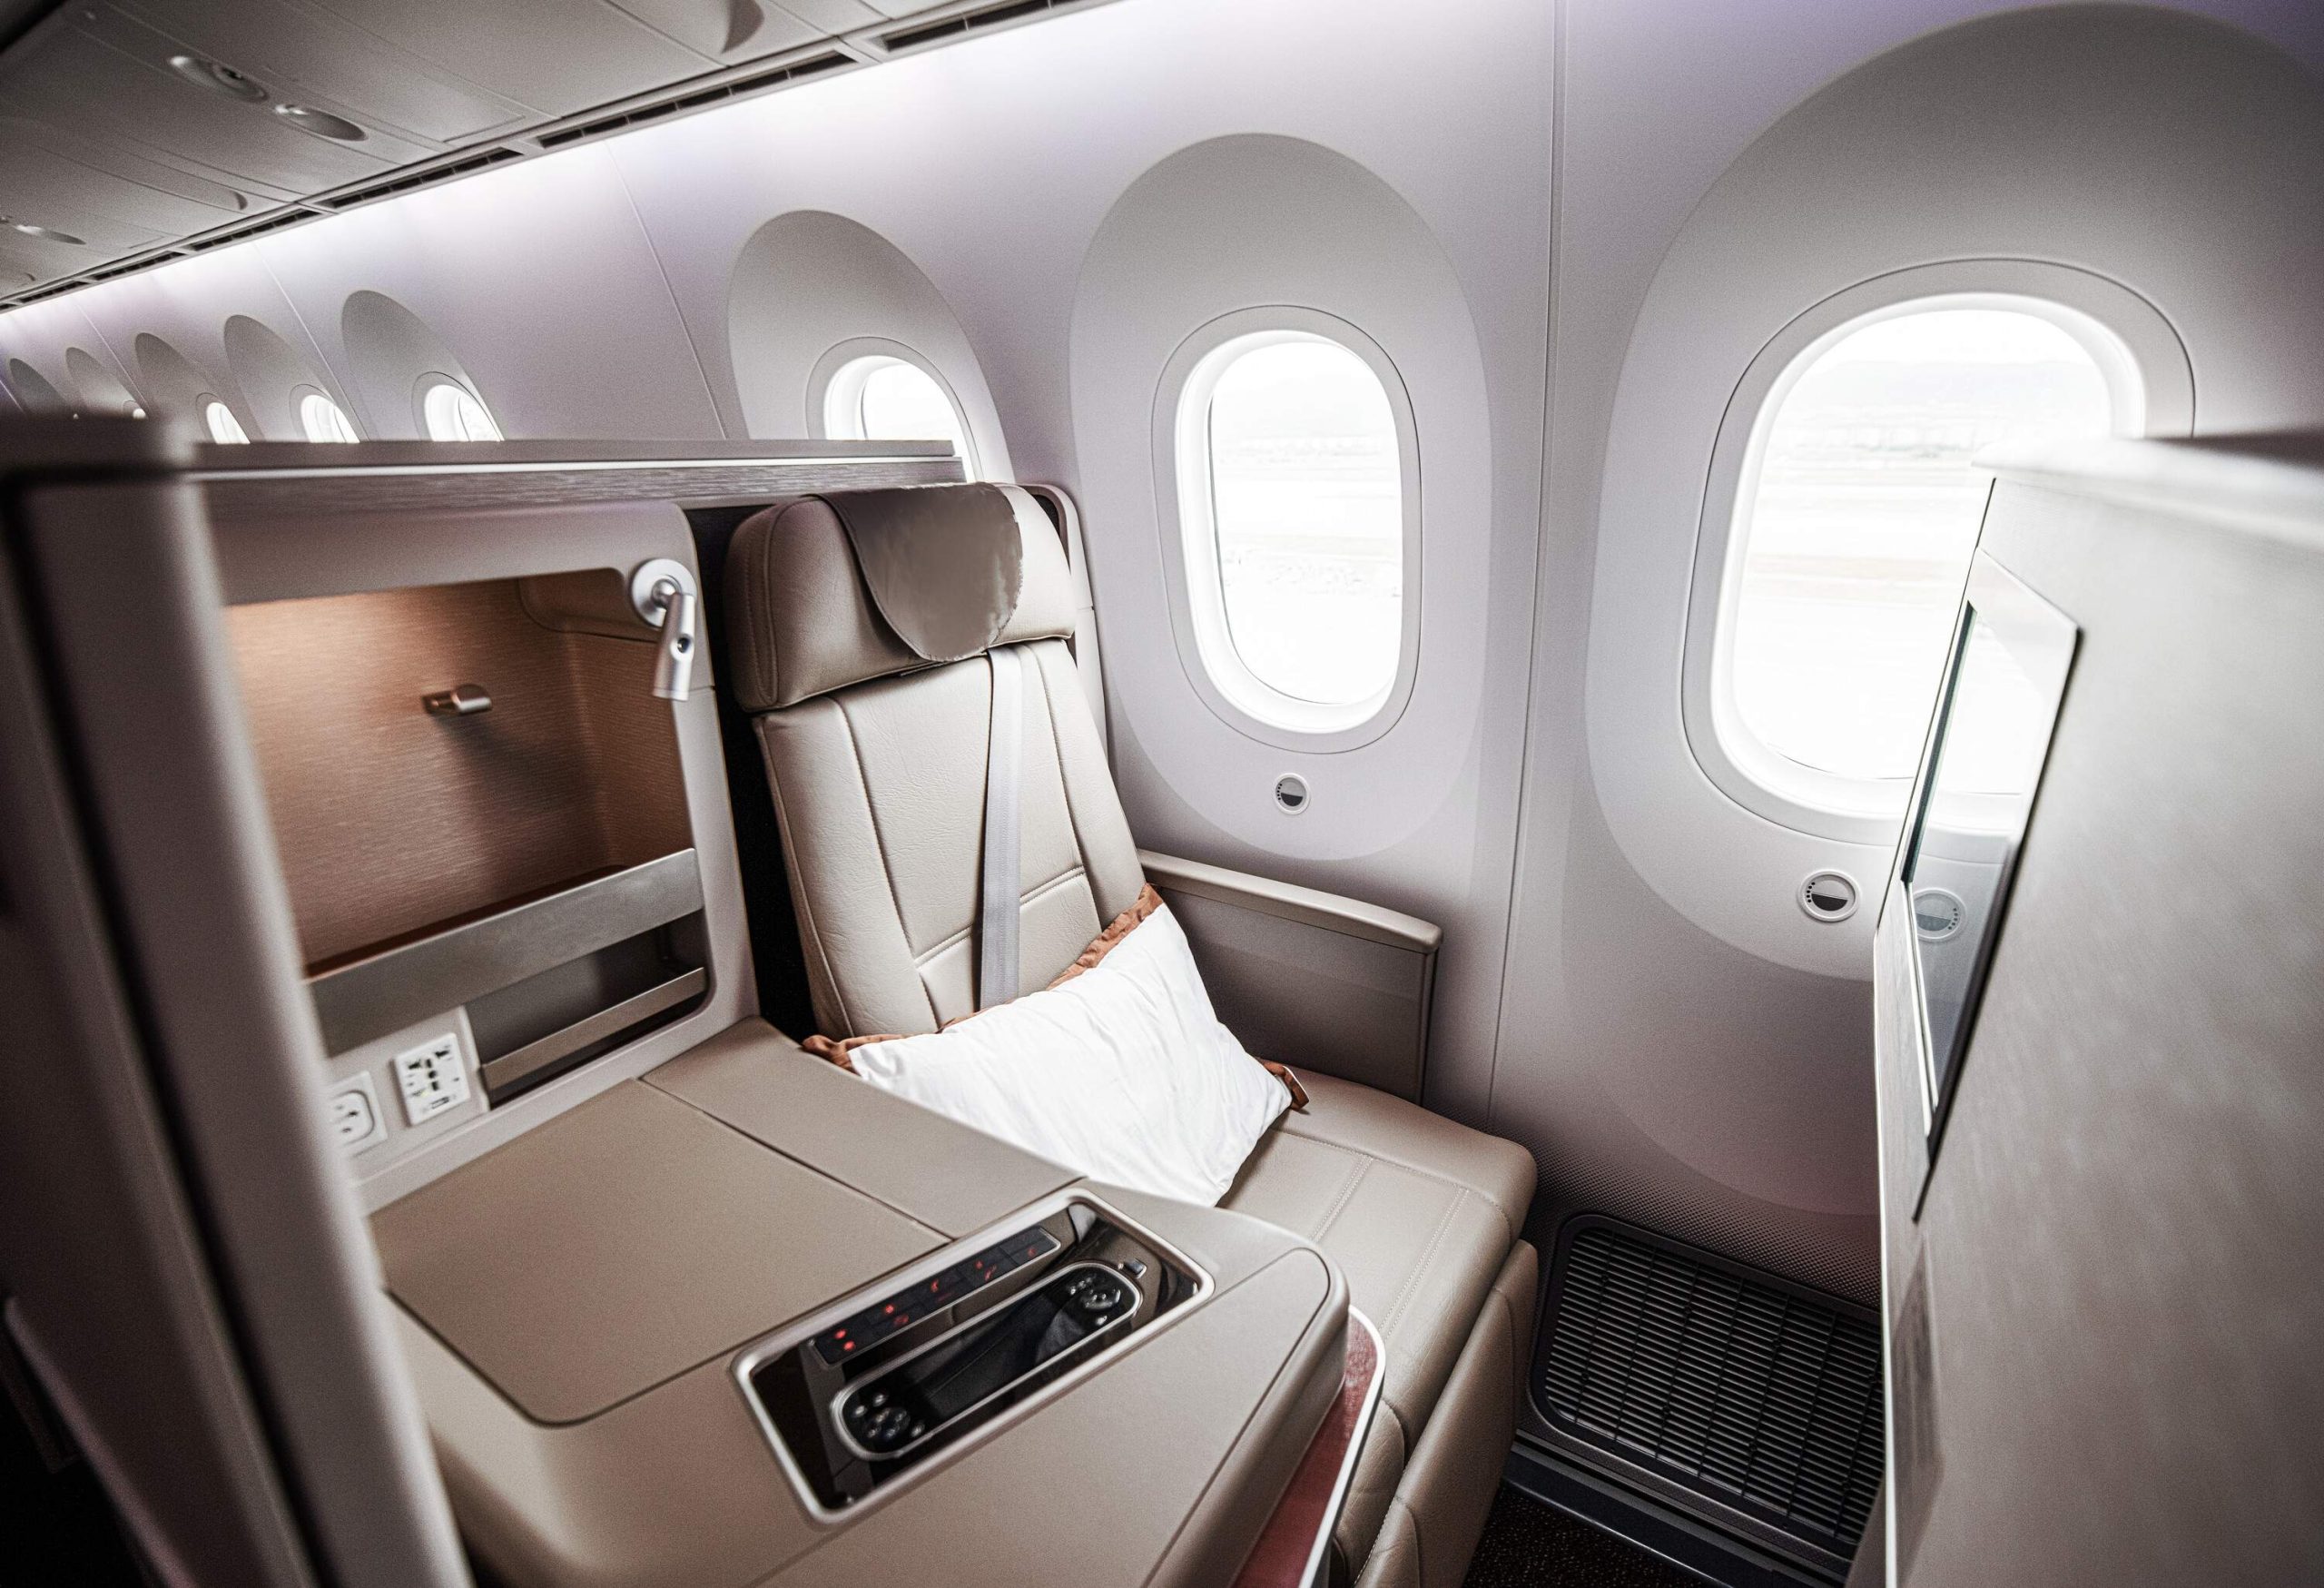 A luxurious seat inside the plane, offering comfort and elegance to passengers.